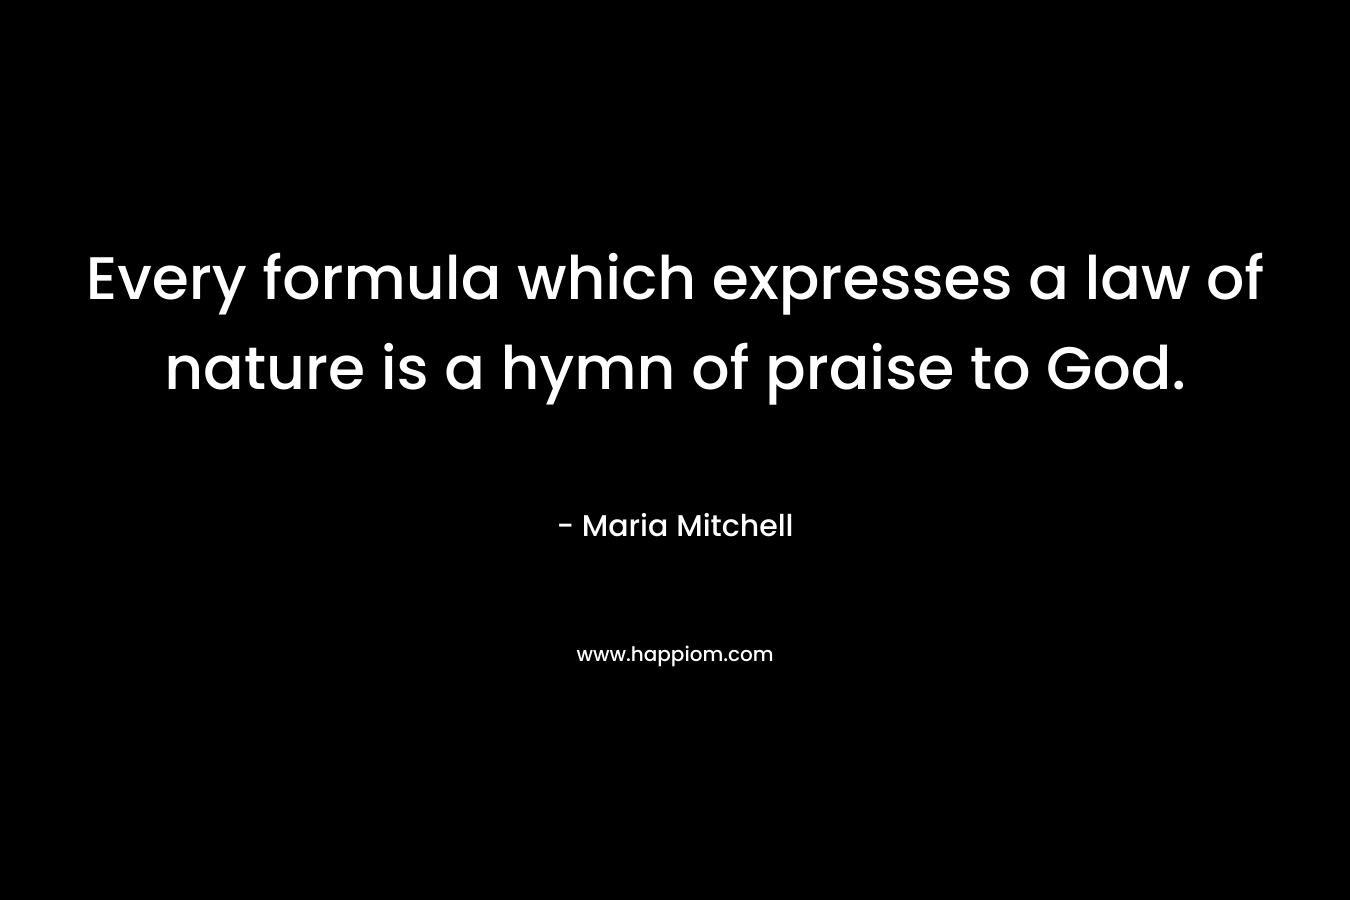 Every formula which expresses a law of nature is a hymn of praise to God. – Maria Mitchell